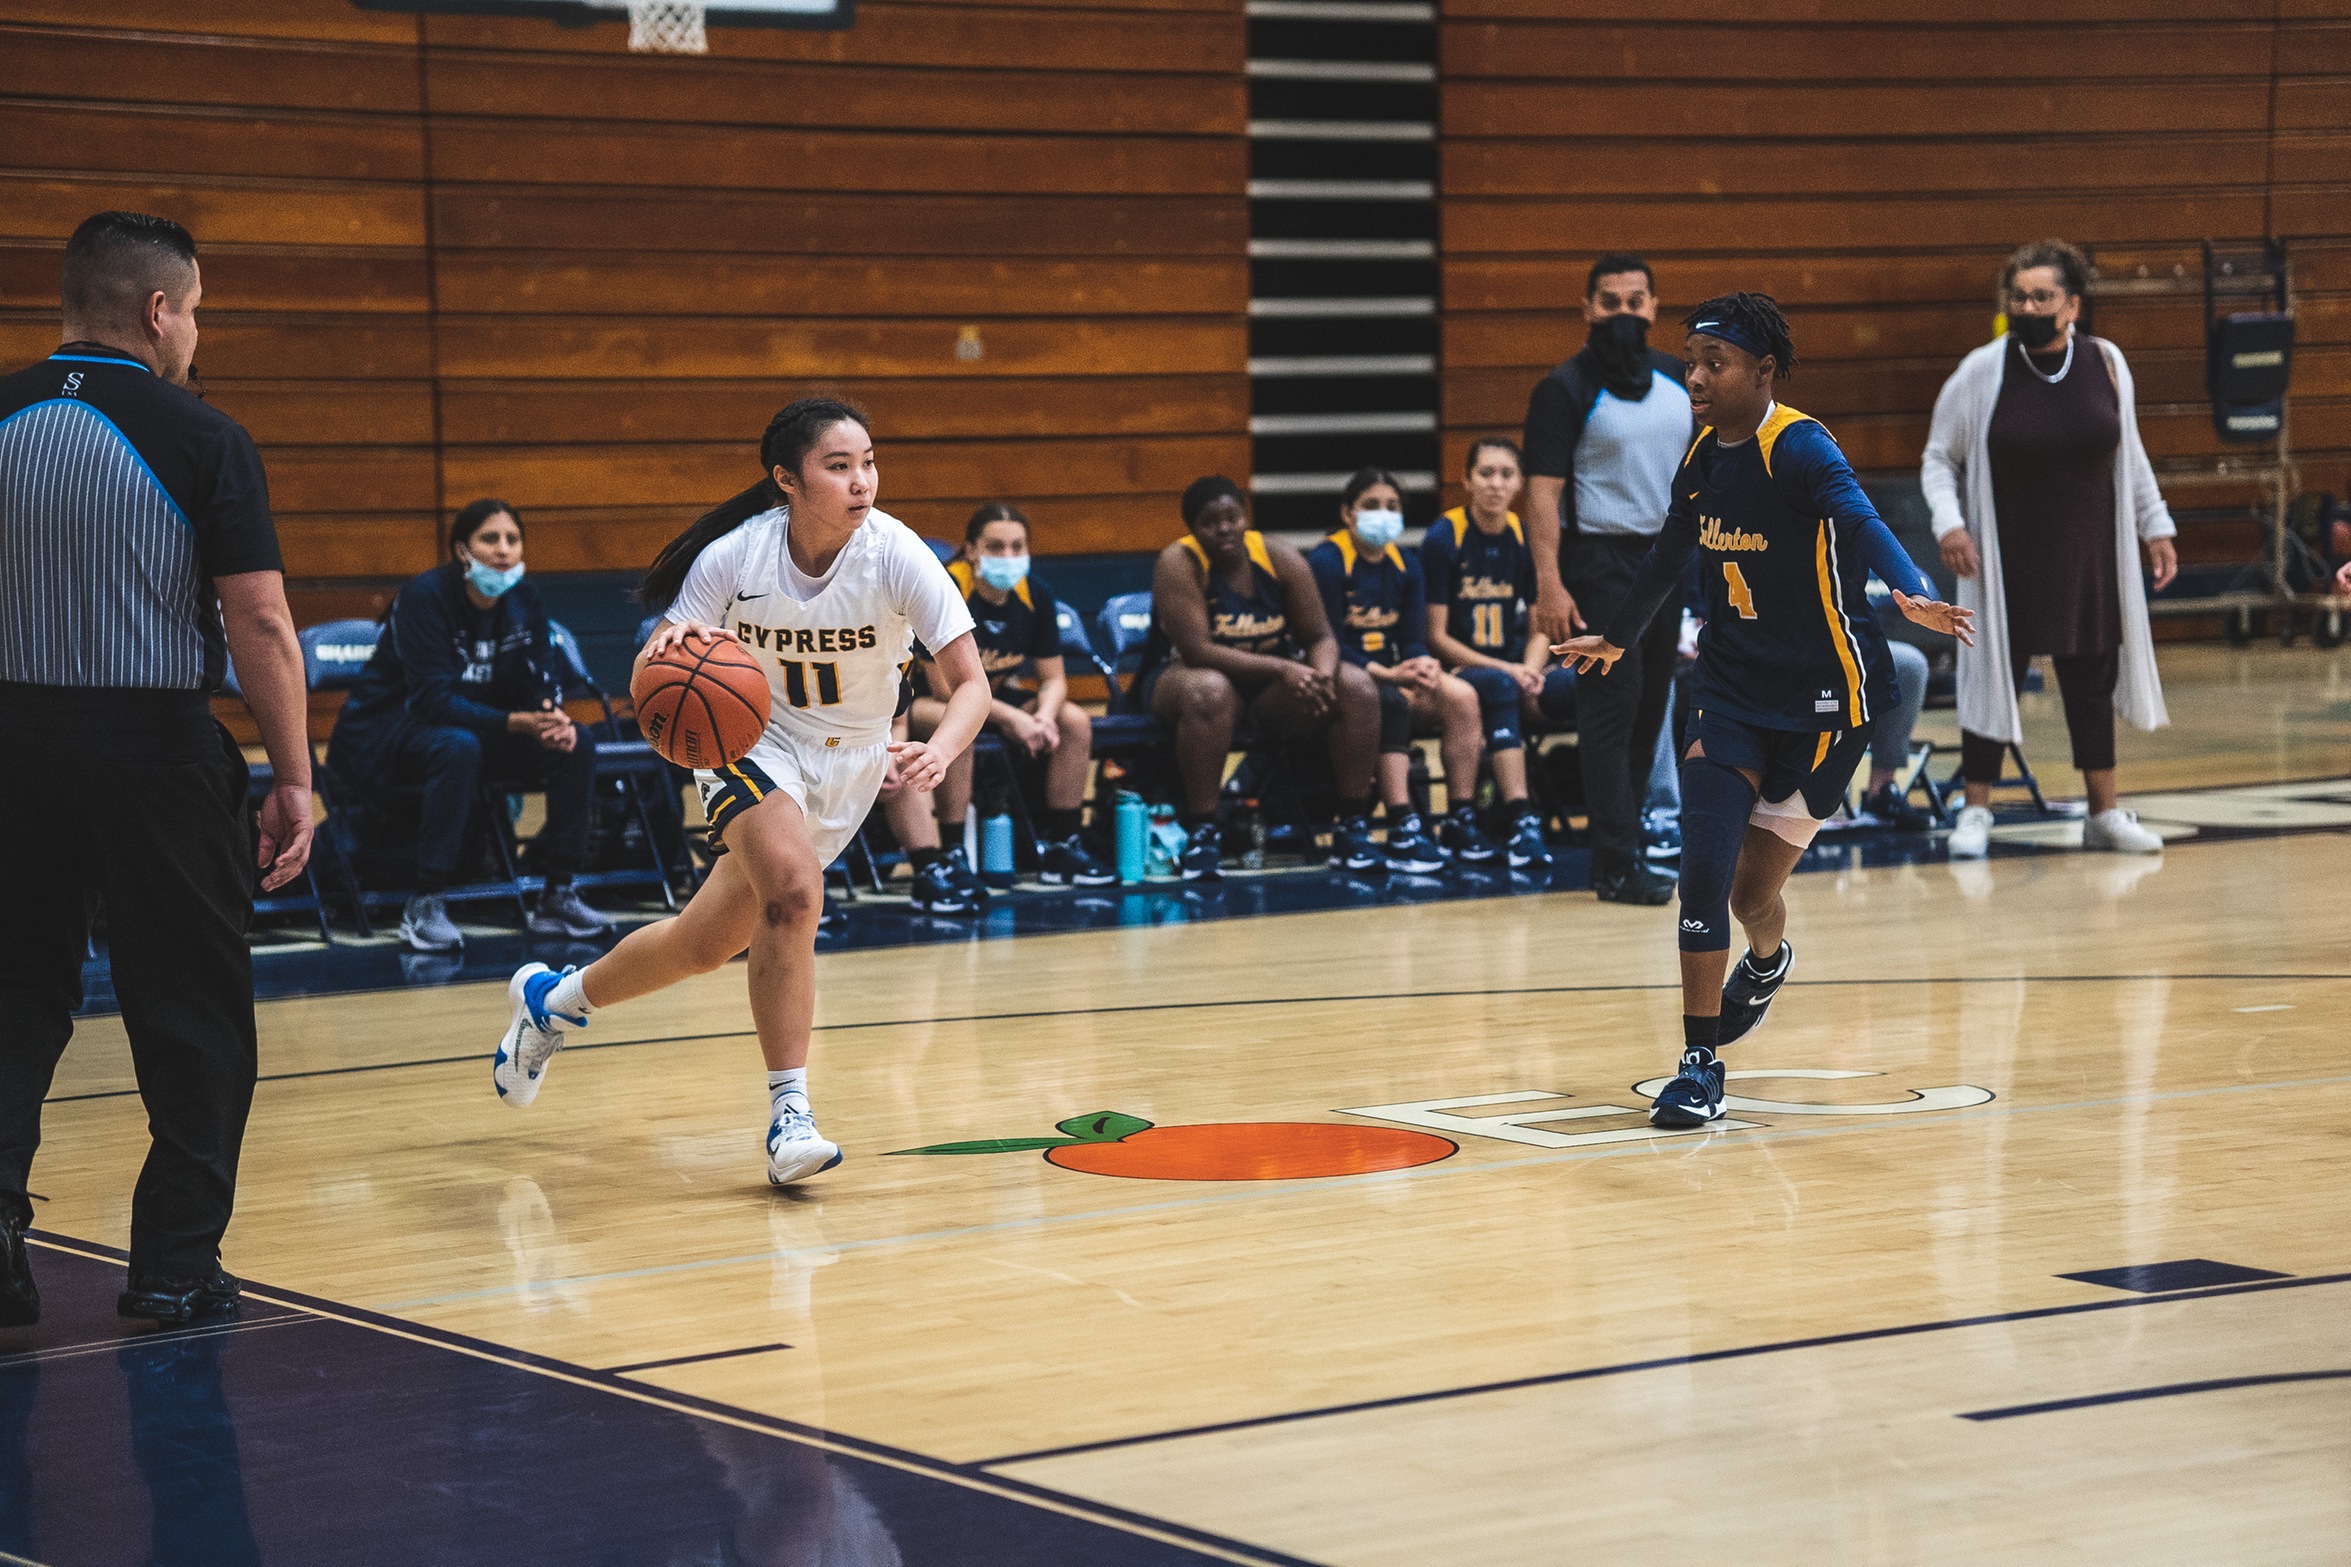 Chargers Take Down Rival Fullerton, 60-53